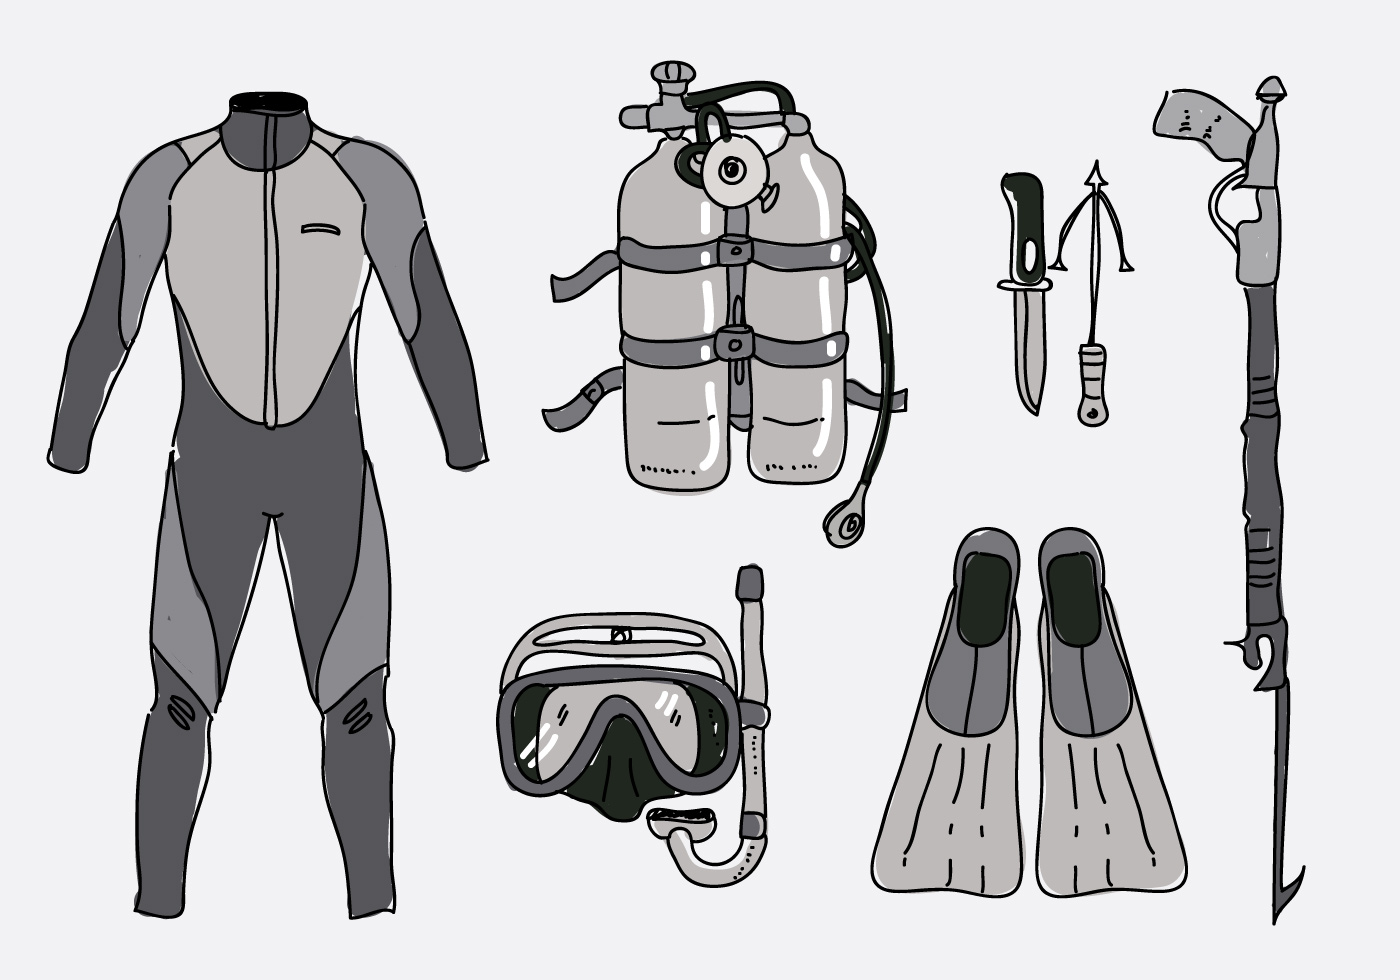 https://static.vecteezy.com/system/resources/previews/000/160/211/original/spearfishing-equipment-collection-hand-drawn-vector-illustration.jpg